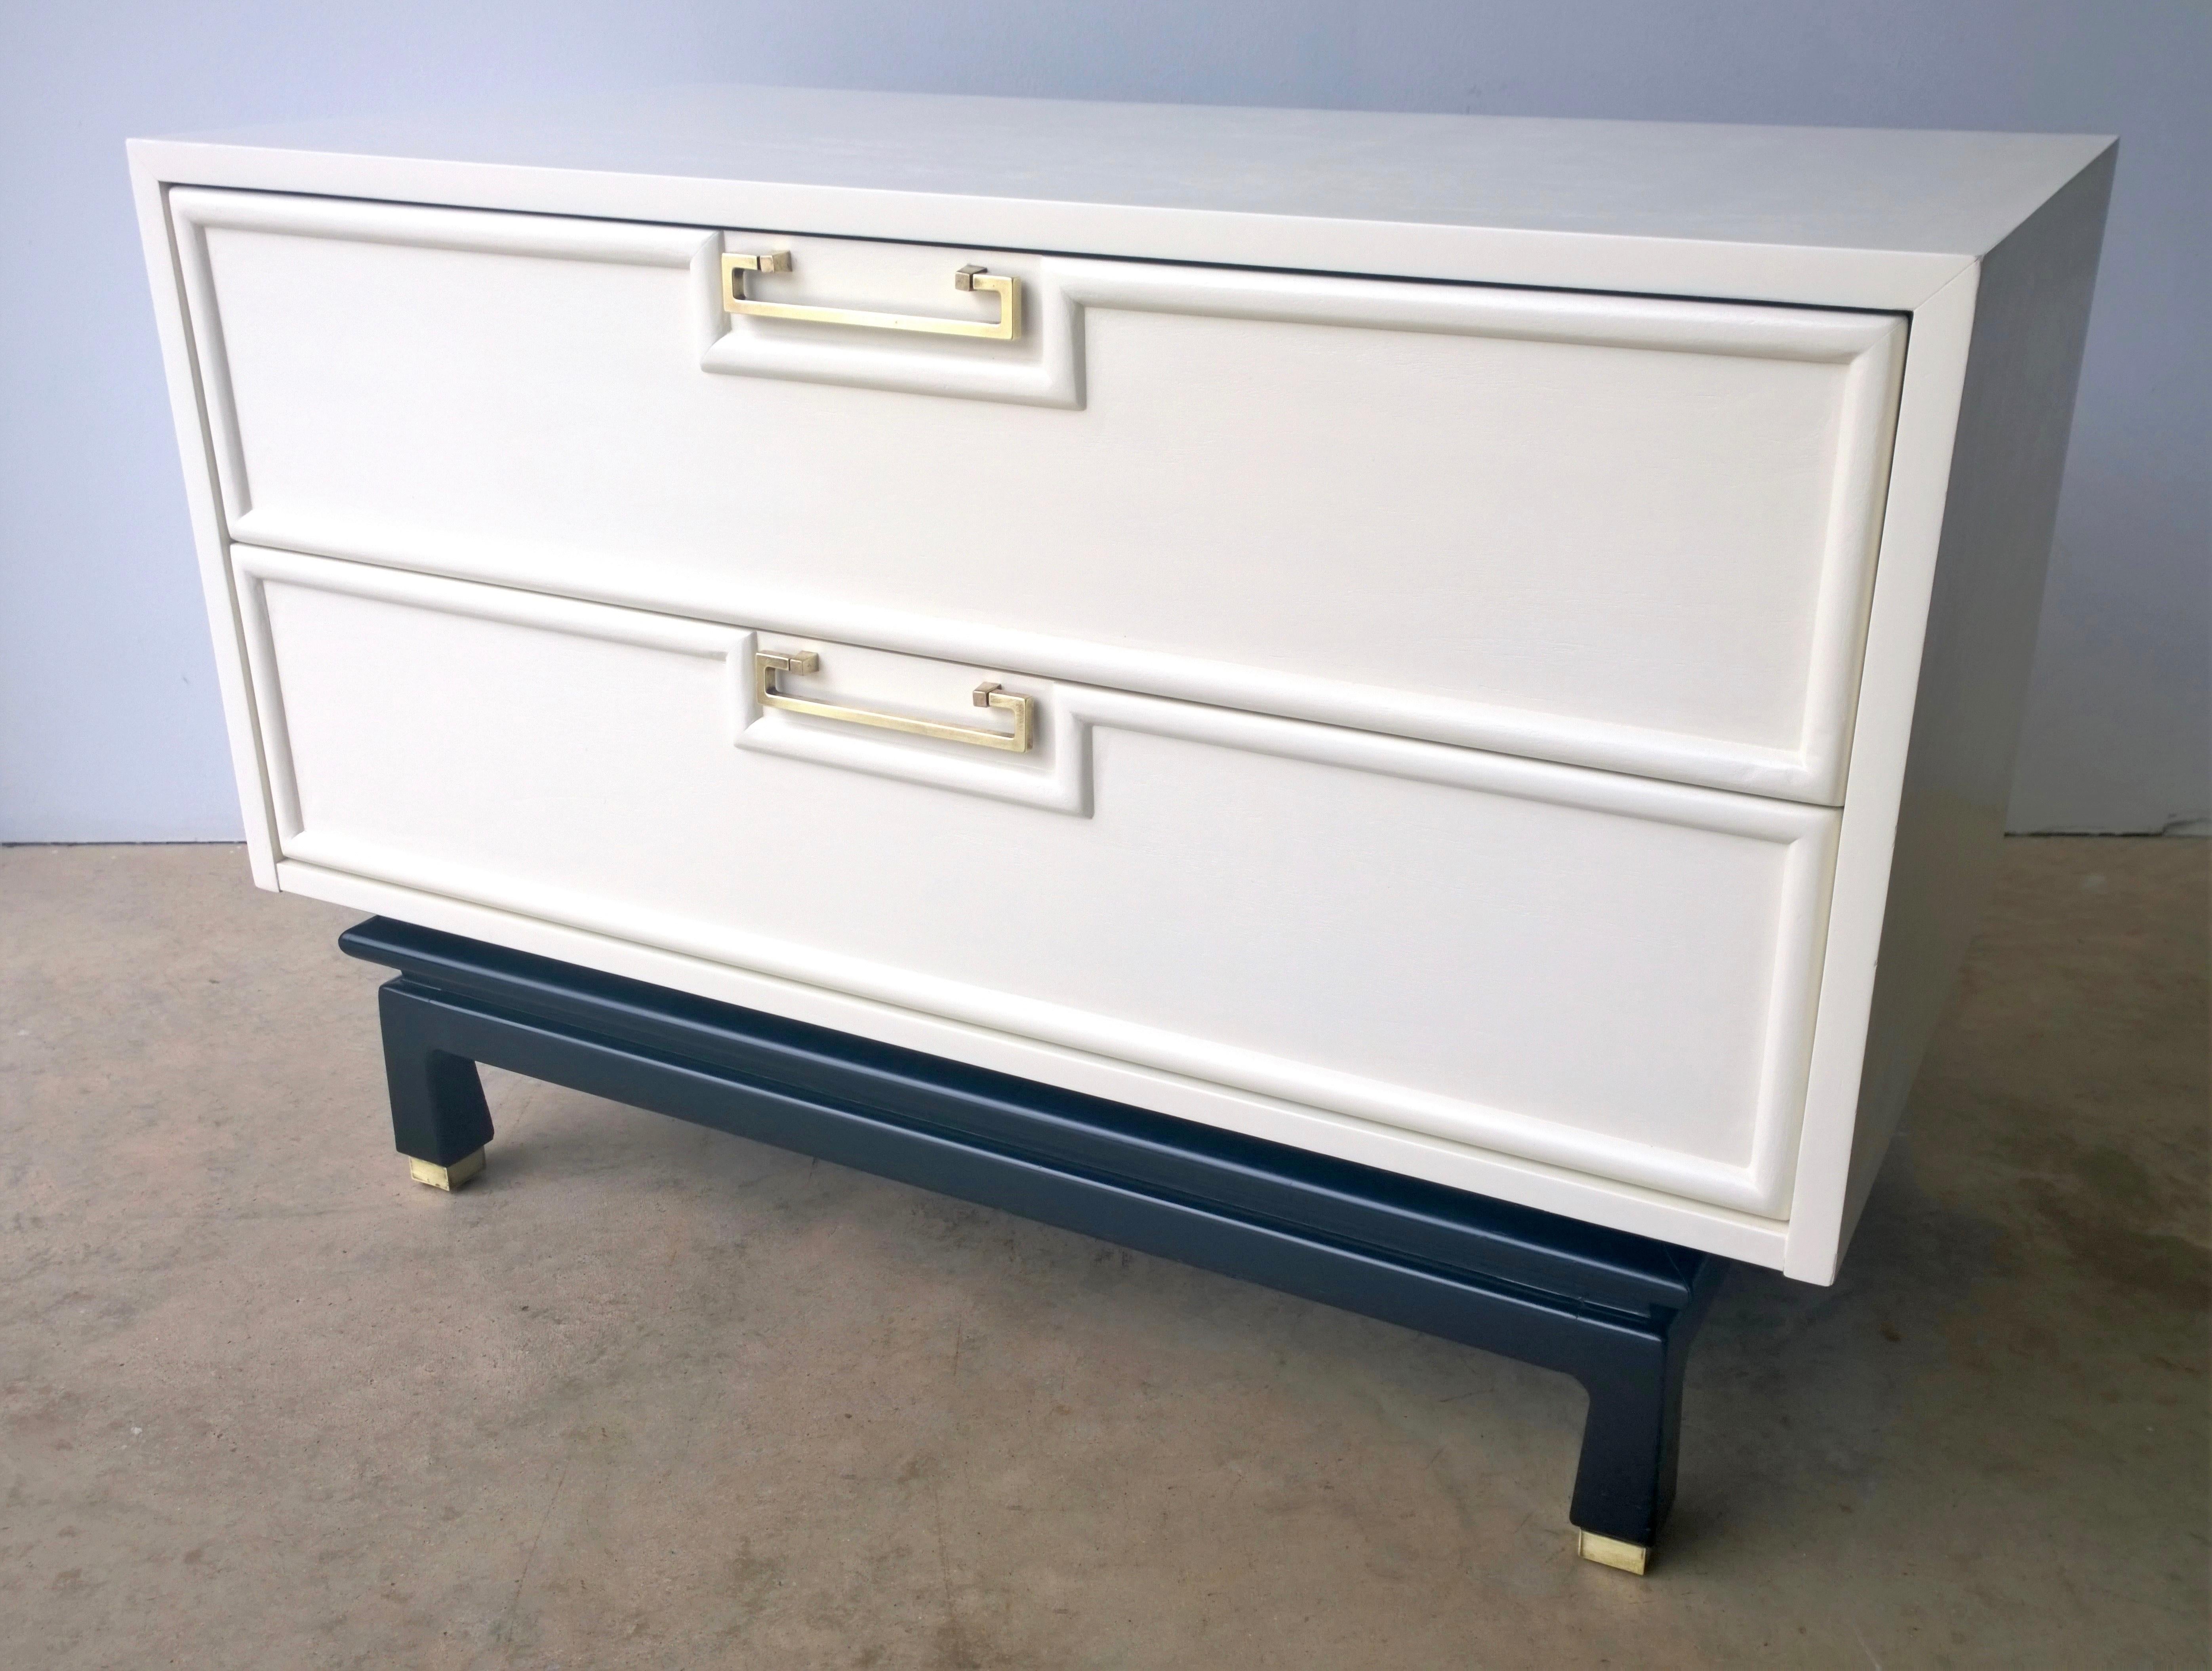 Offered is a signed Mid-Century Modern American of Martinsville Asian / chinoiserie inspired two-drawer bedside table / chest of drawers newly lacquered in a creamy white over mahogany with brass pulls, sabots and black wood base. This piece is